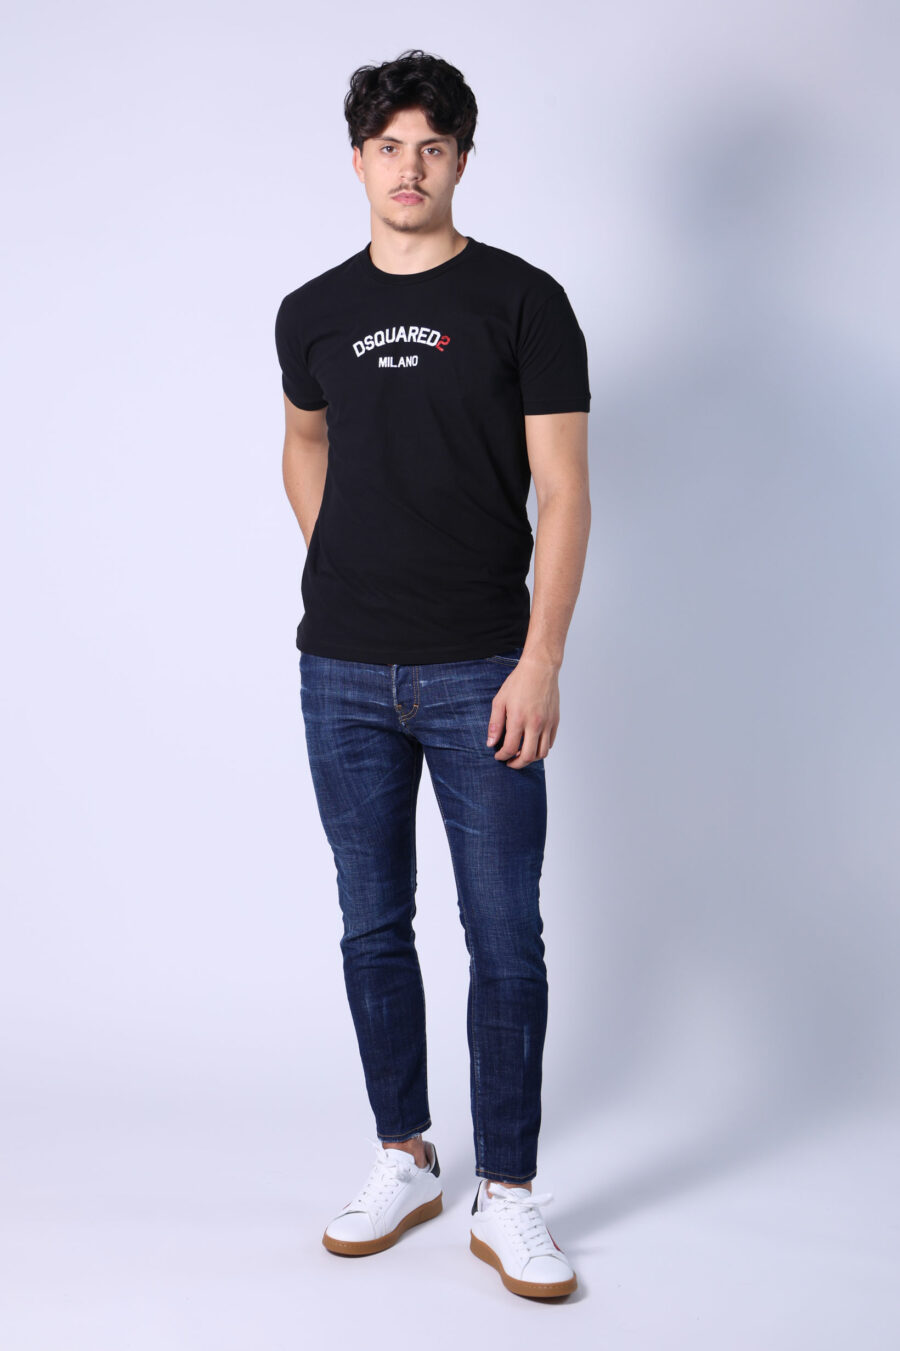 Black T-shirt with minilogue "dsquared2 milano" - Untitled Catalog 05471